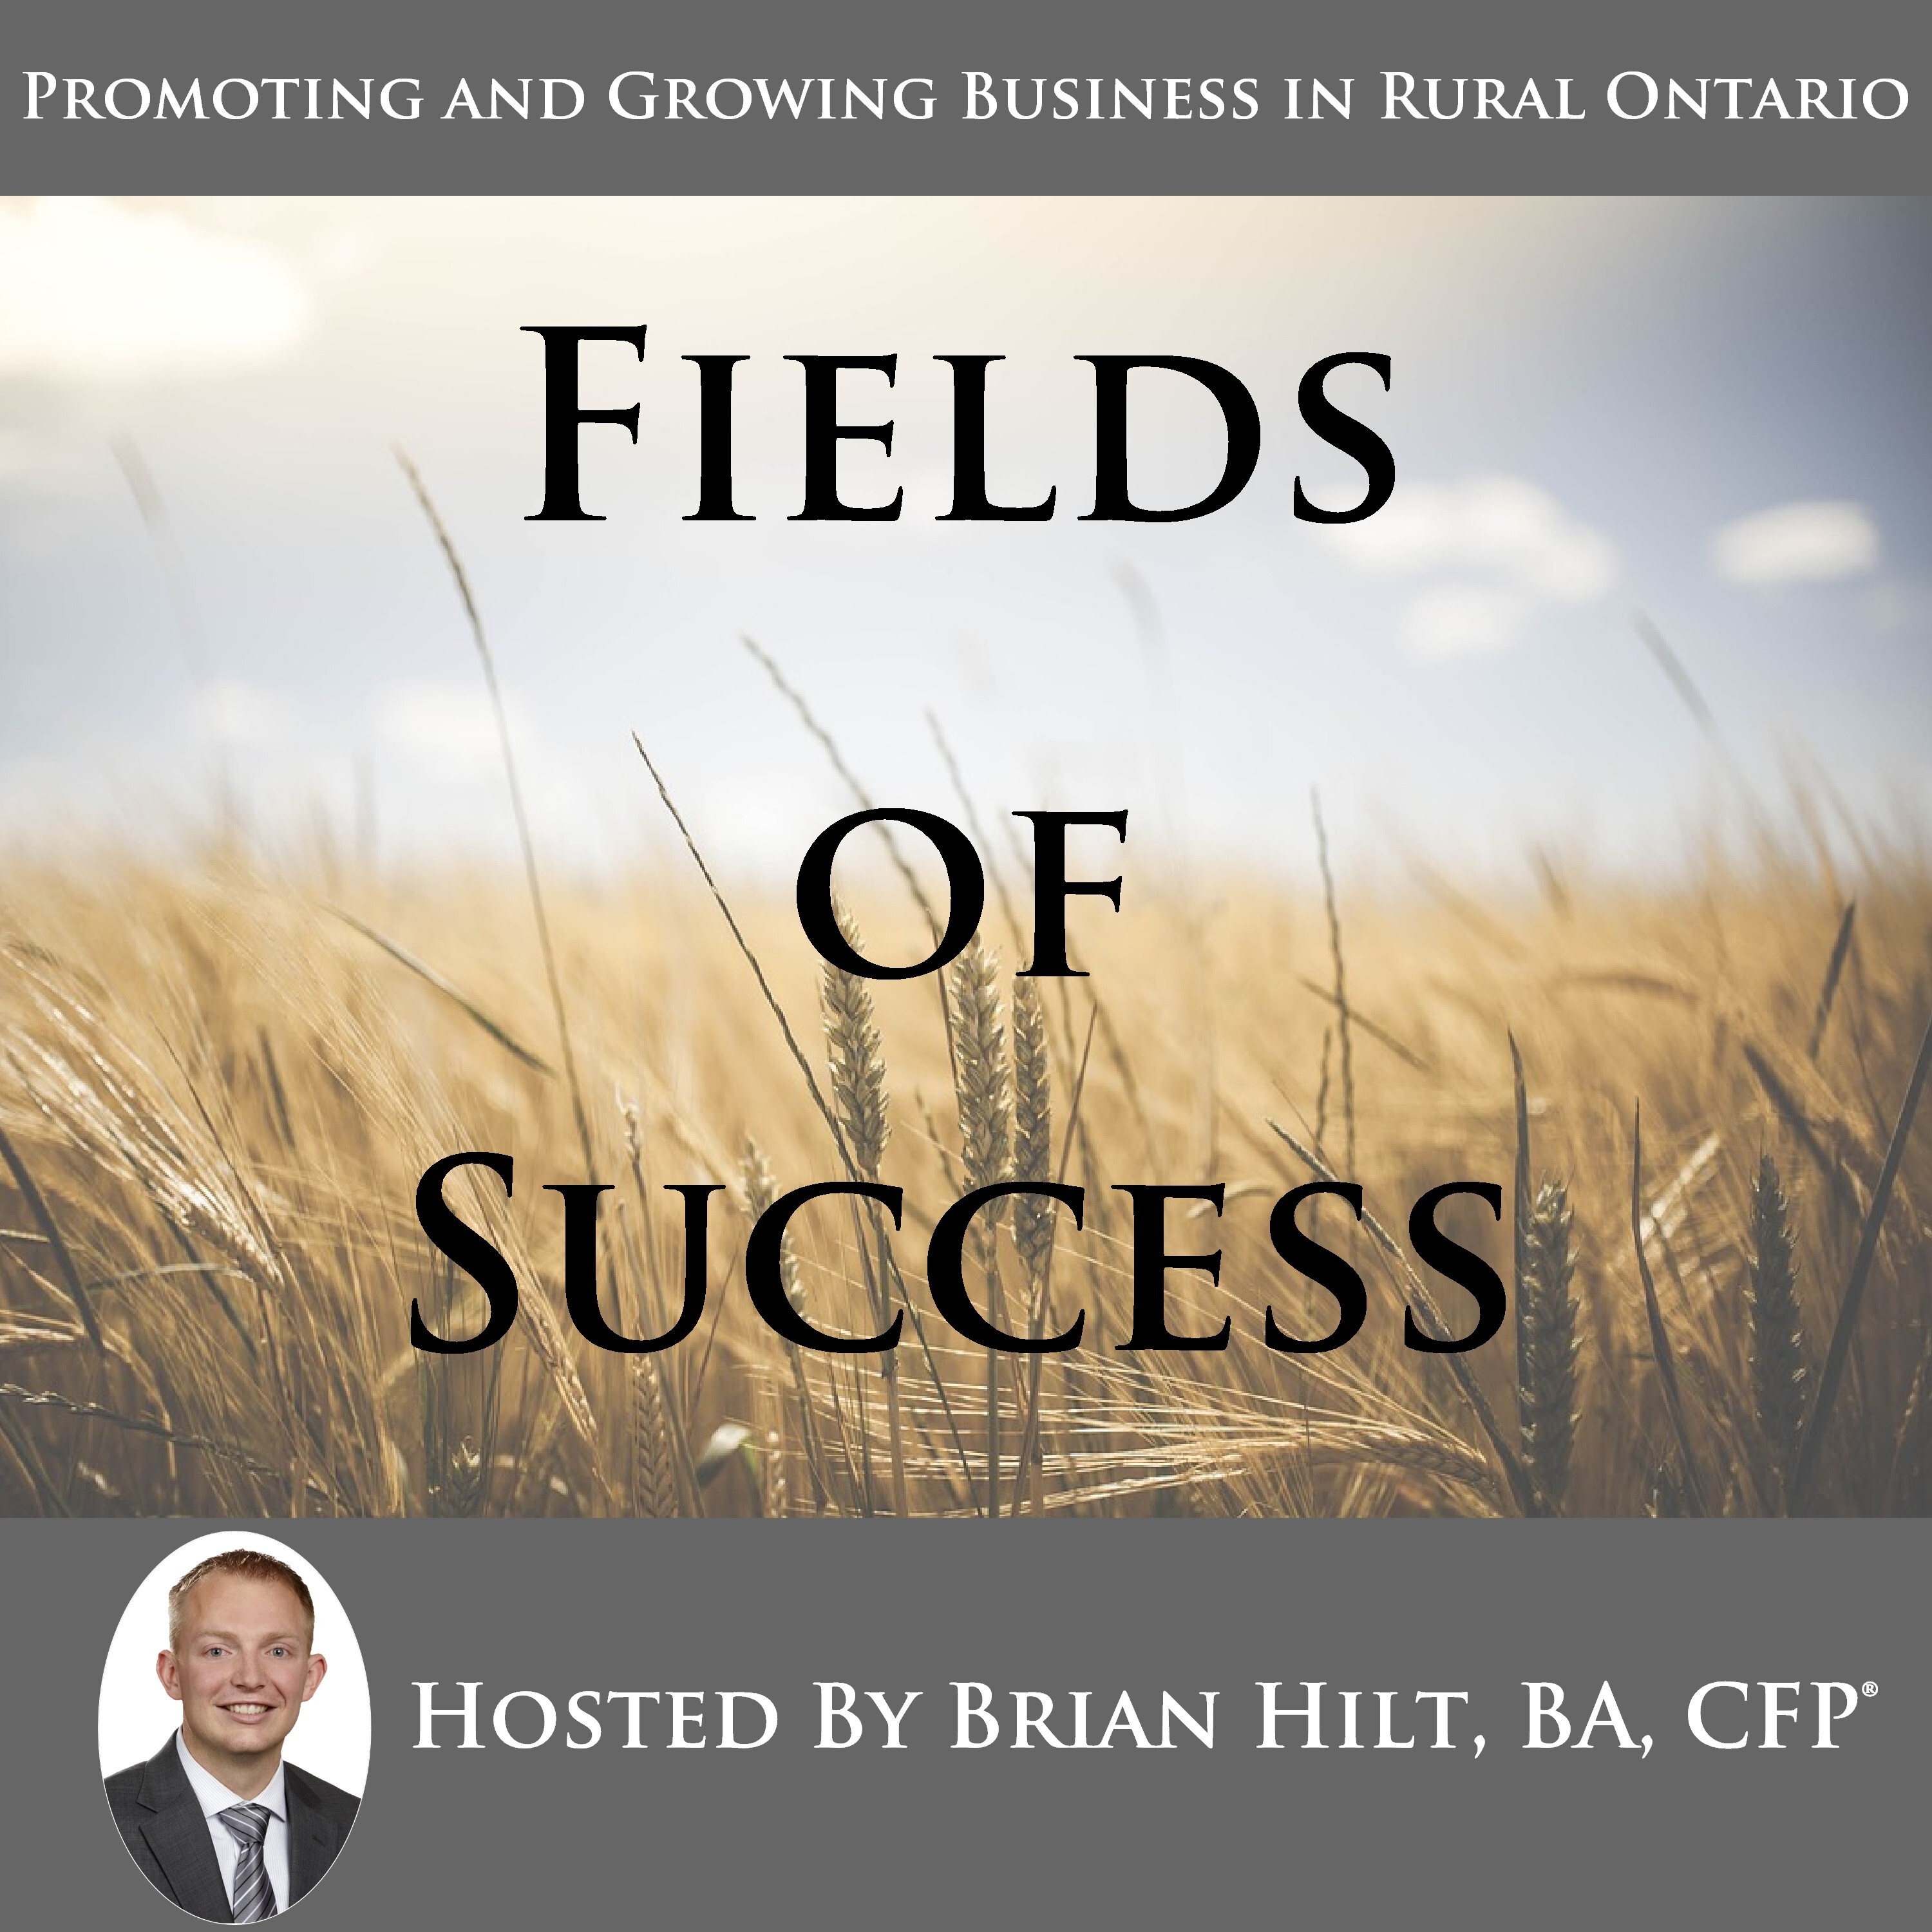 Episode 001: Introduction to the Fields of Success Podcast with Brian Hilt